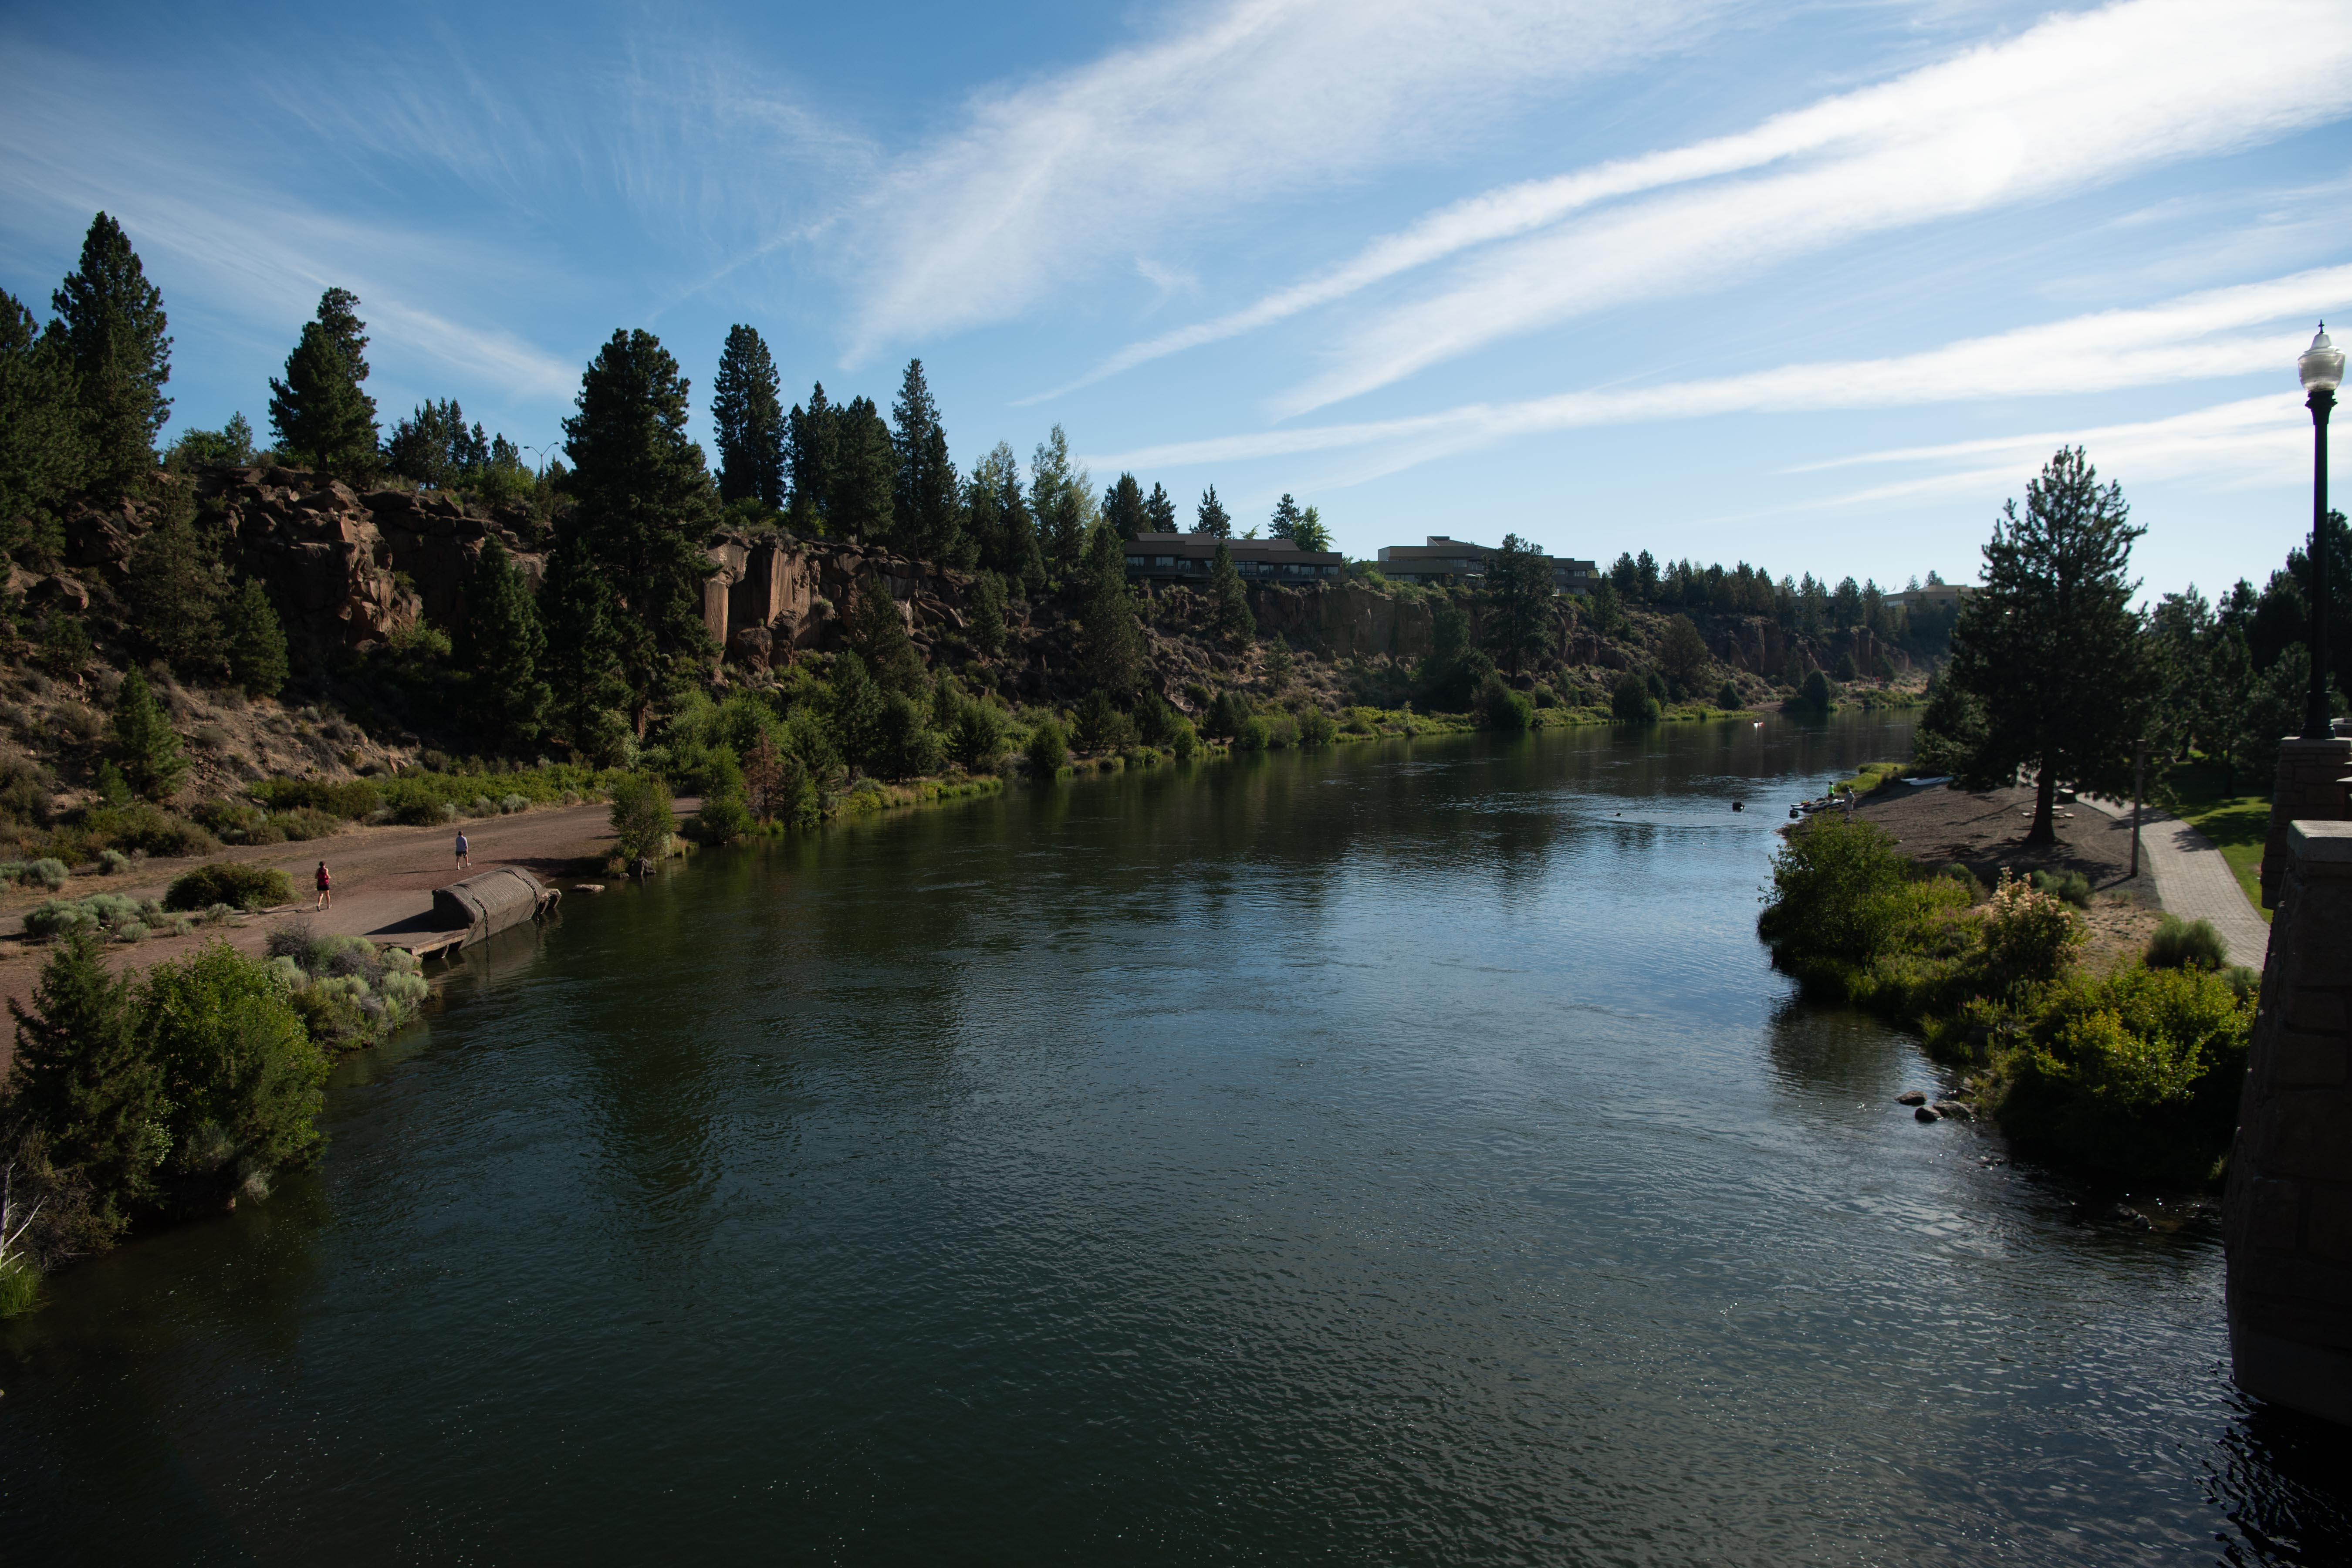 The Deschutes River Basin running through Bend, Oregon. The Central Oregon Irrigation District will develop a suite of analytical tools to evaluate and prioritize water conservation efforts in the Deschutes River Basin.